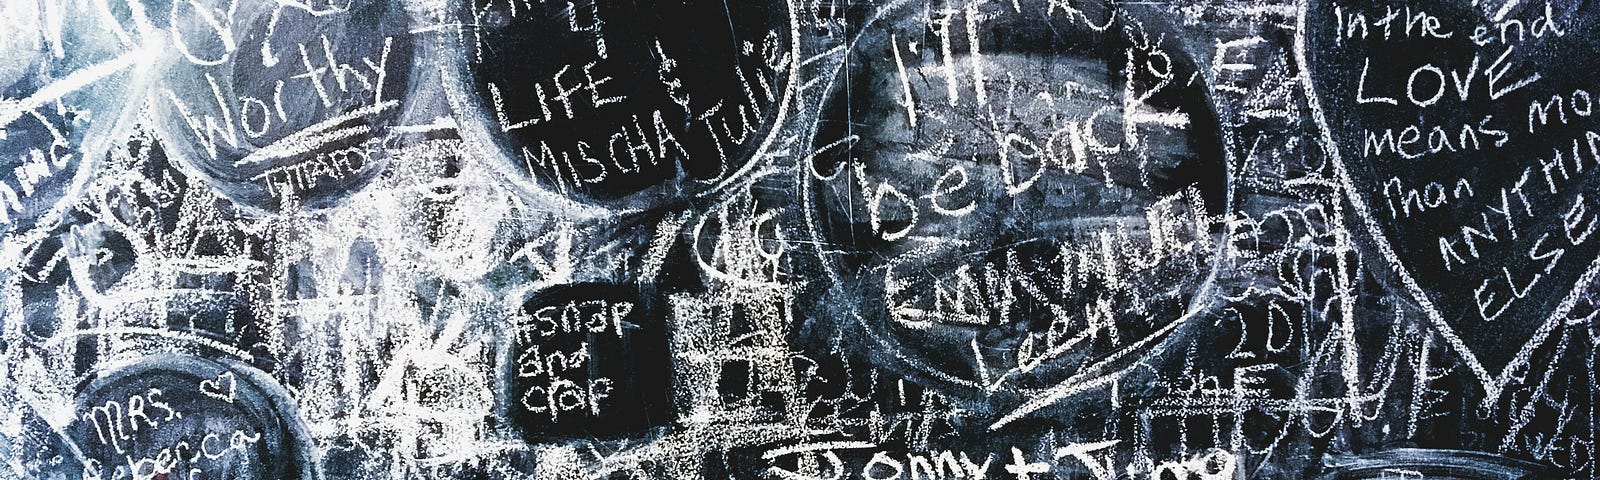 black chalkboard filled with notes and scribbles